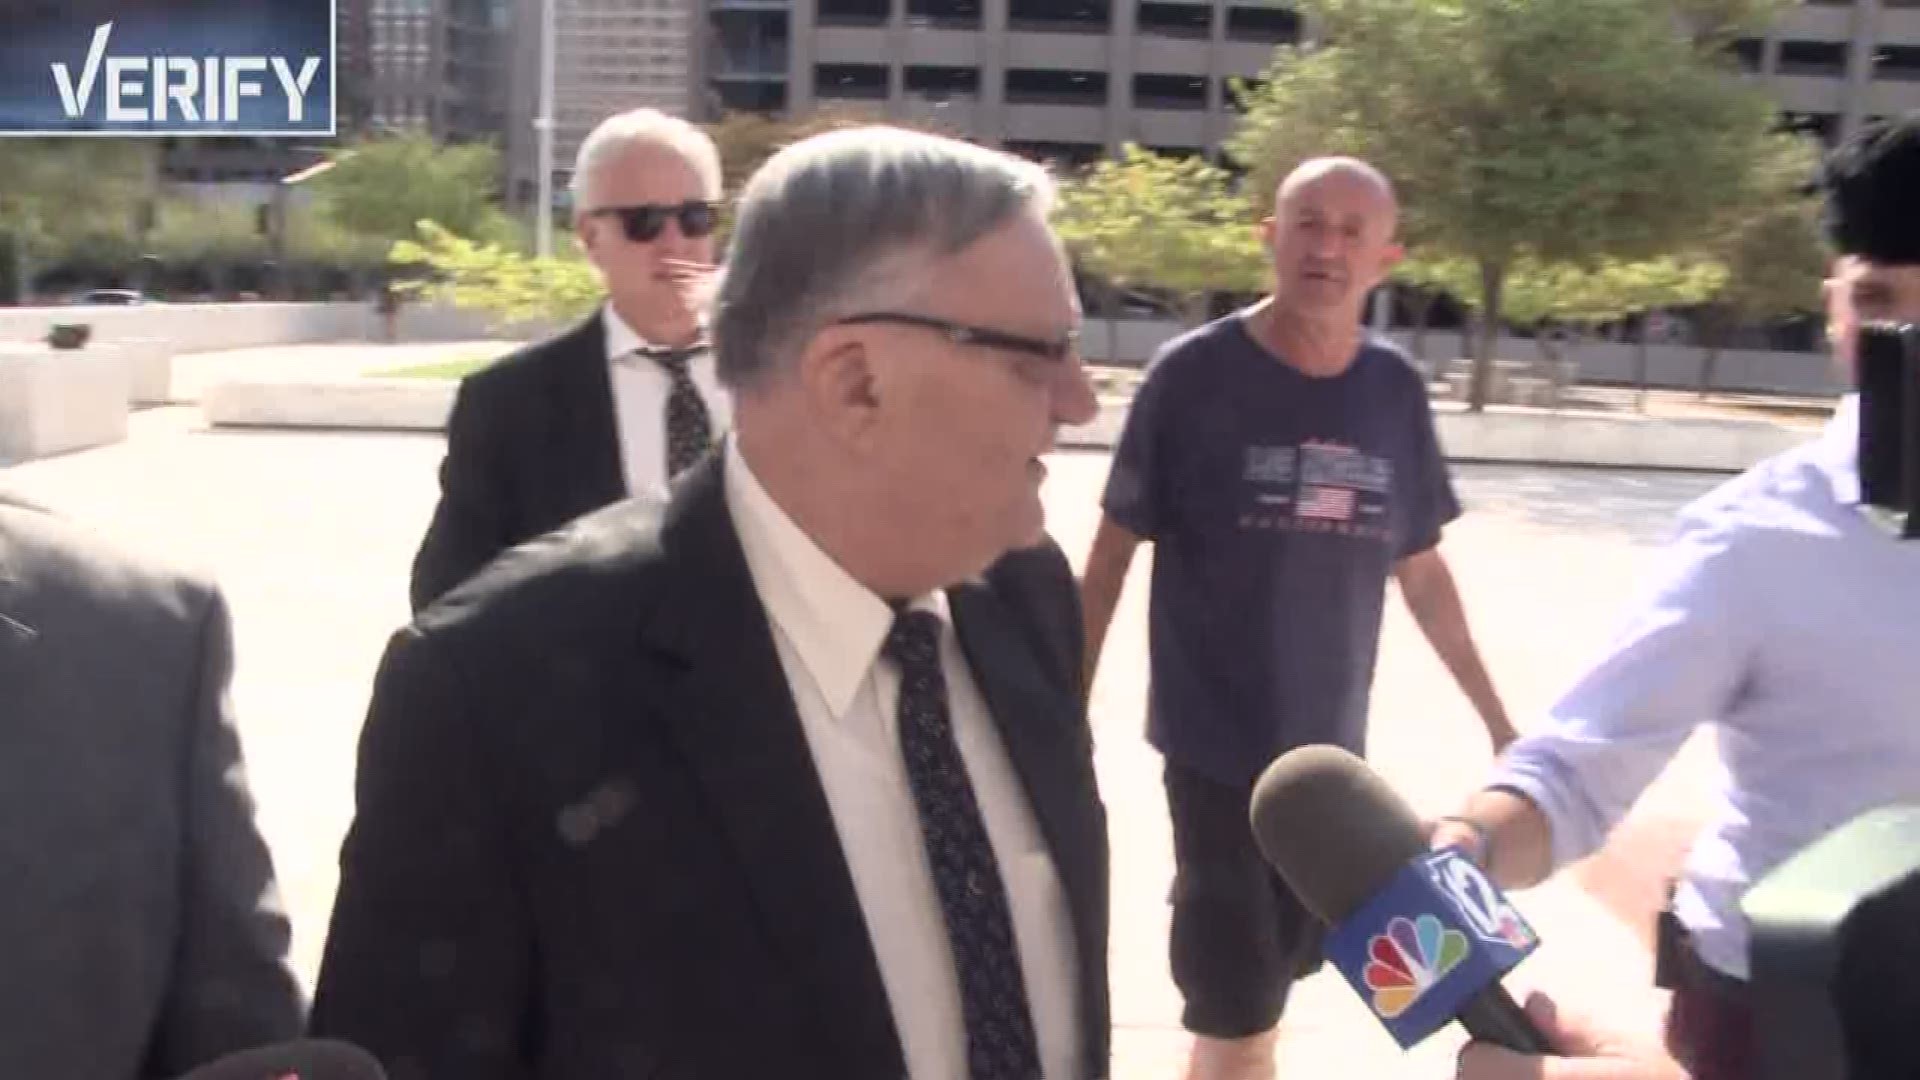 12 News' reporter Brahm Resnik looks at the sentencing options Joe Arpaio could face from his guilty verdict.